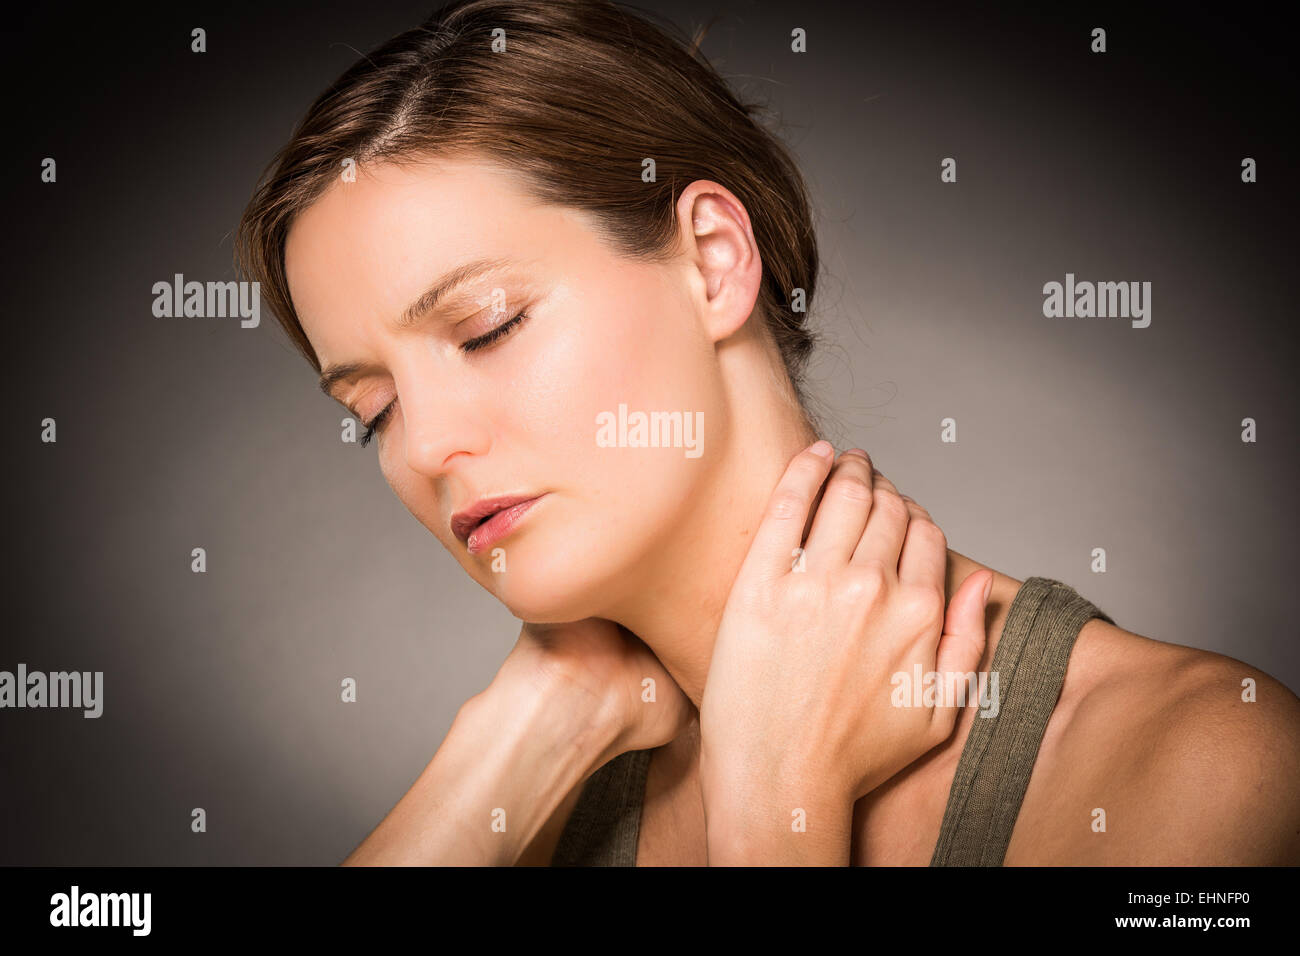 Woman suffering from neck pain. Stock Photo